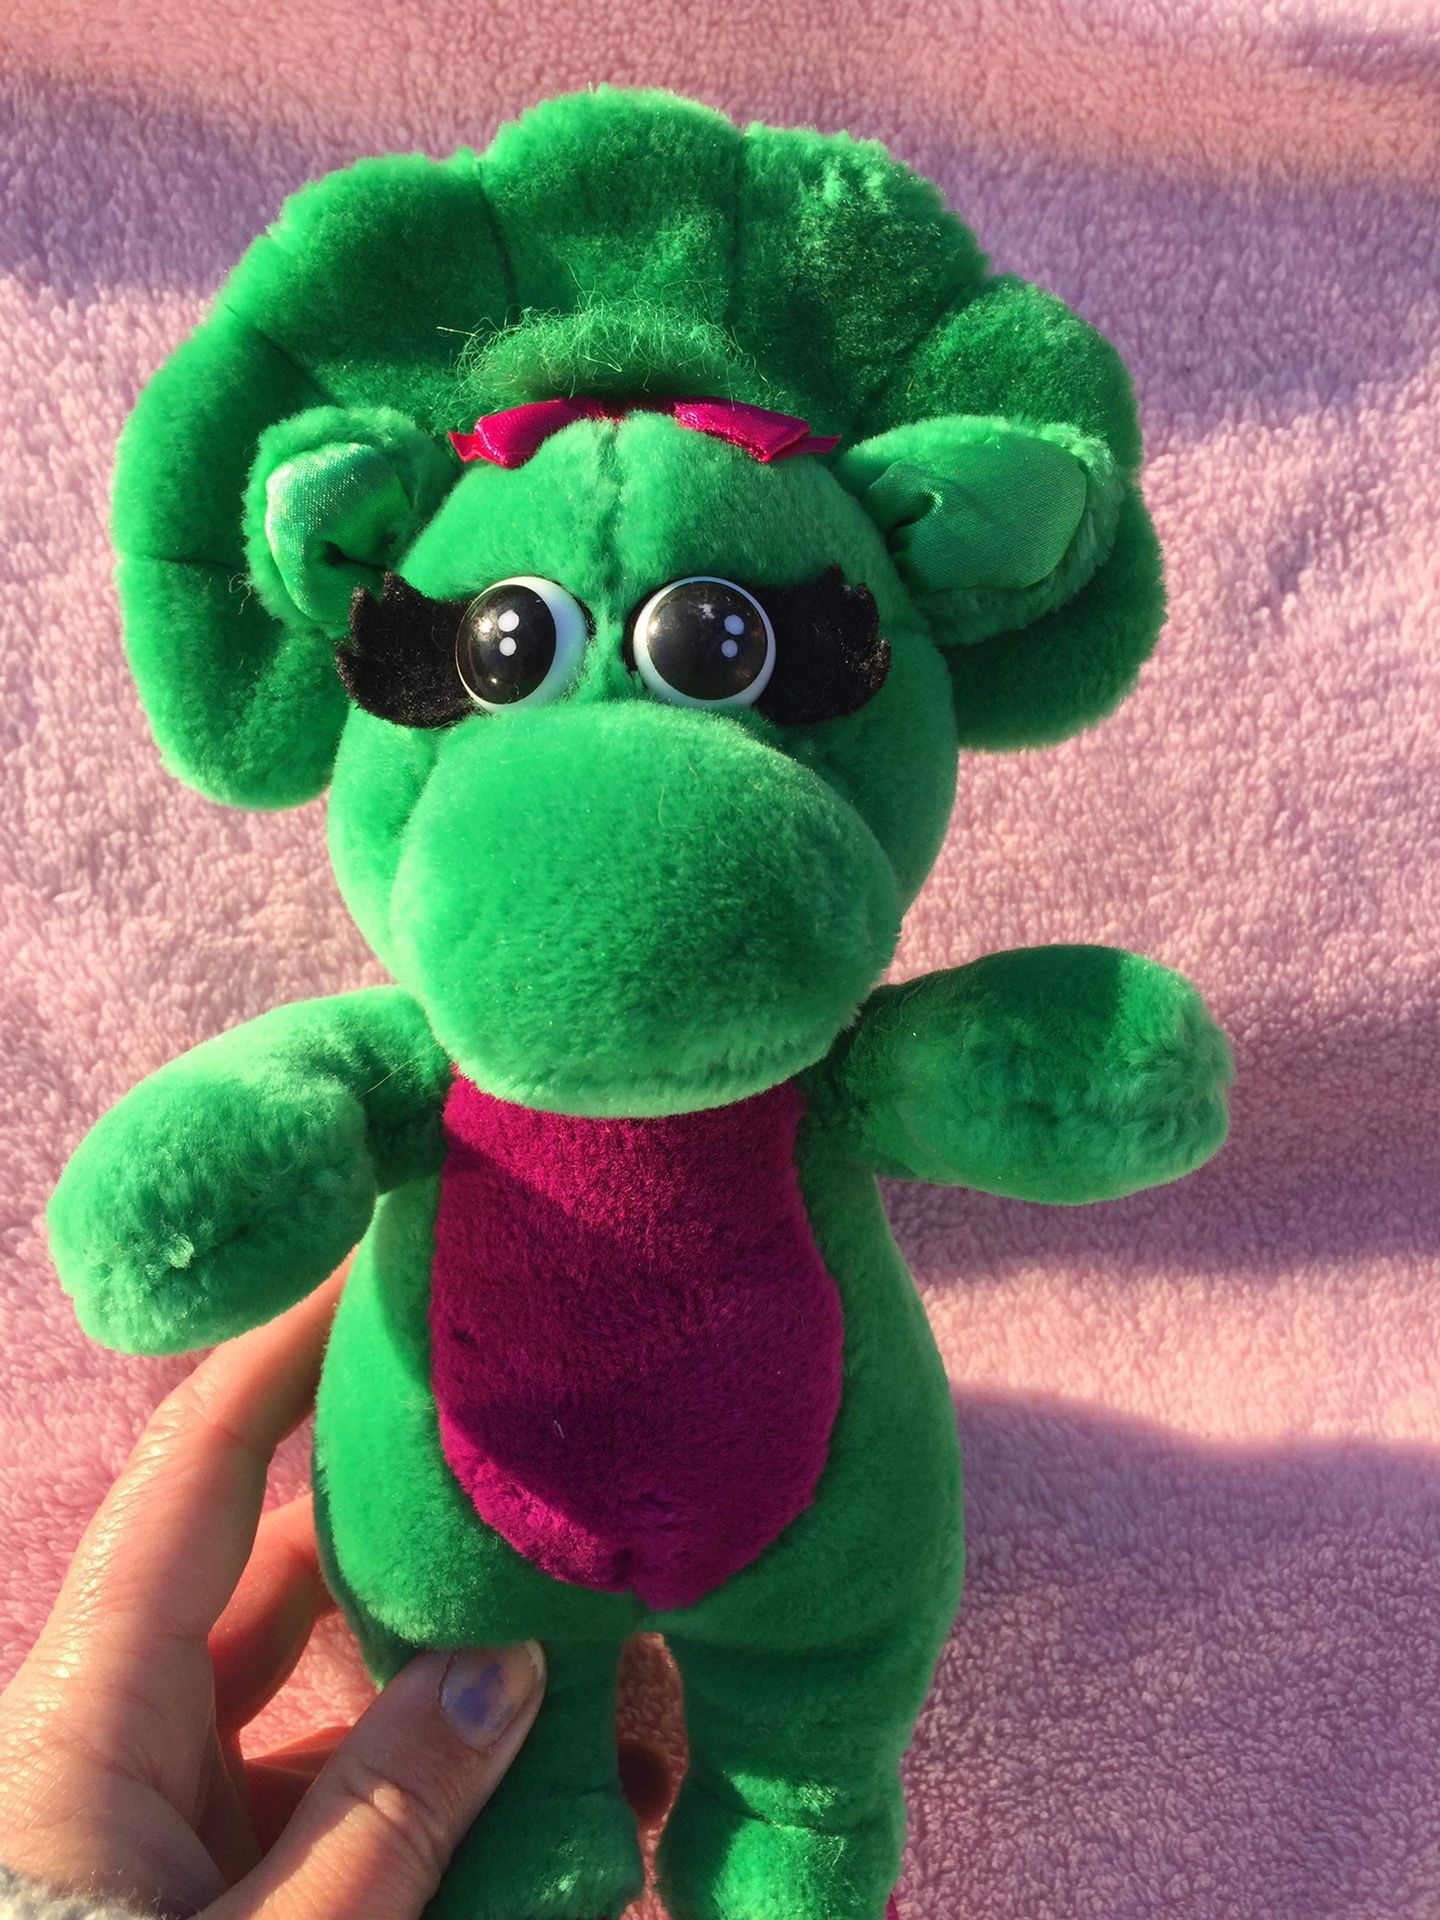 Vintage Baby Bop 7 in. Barney Plush 1992 The Lyons Group Dinosaur Stuffed  Animal for Sale in Floral Park, NY - OfferUp